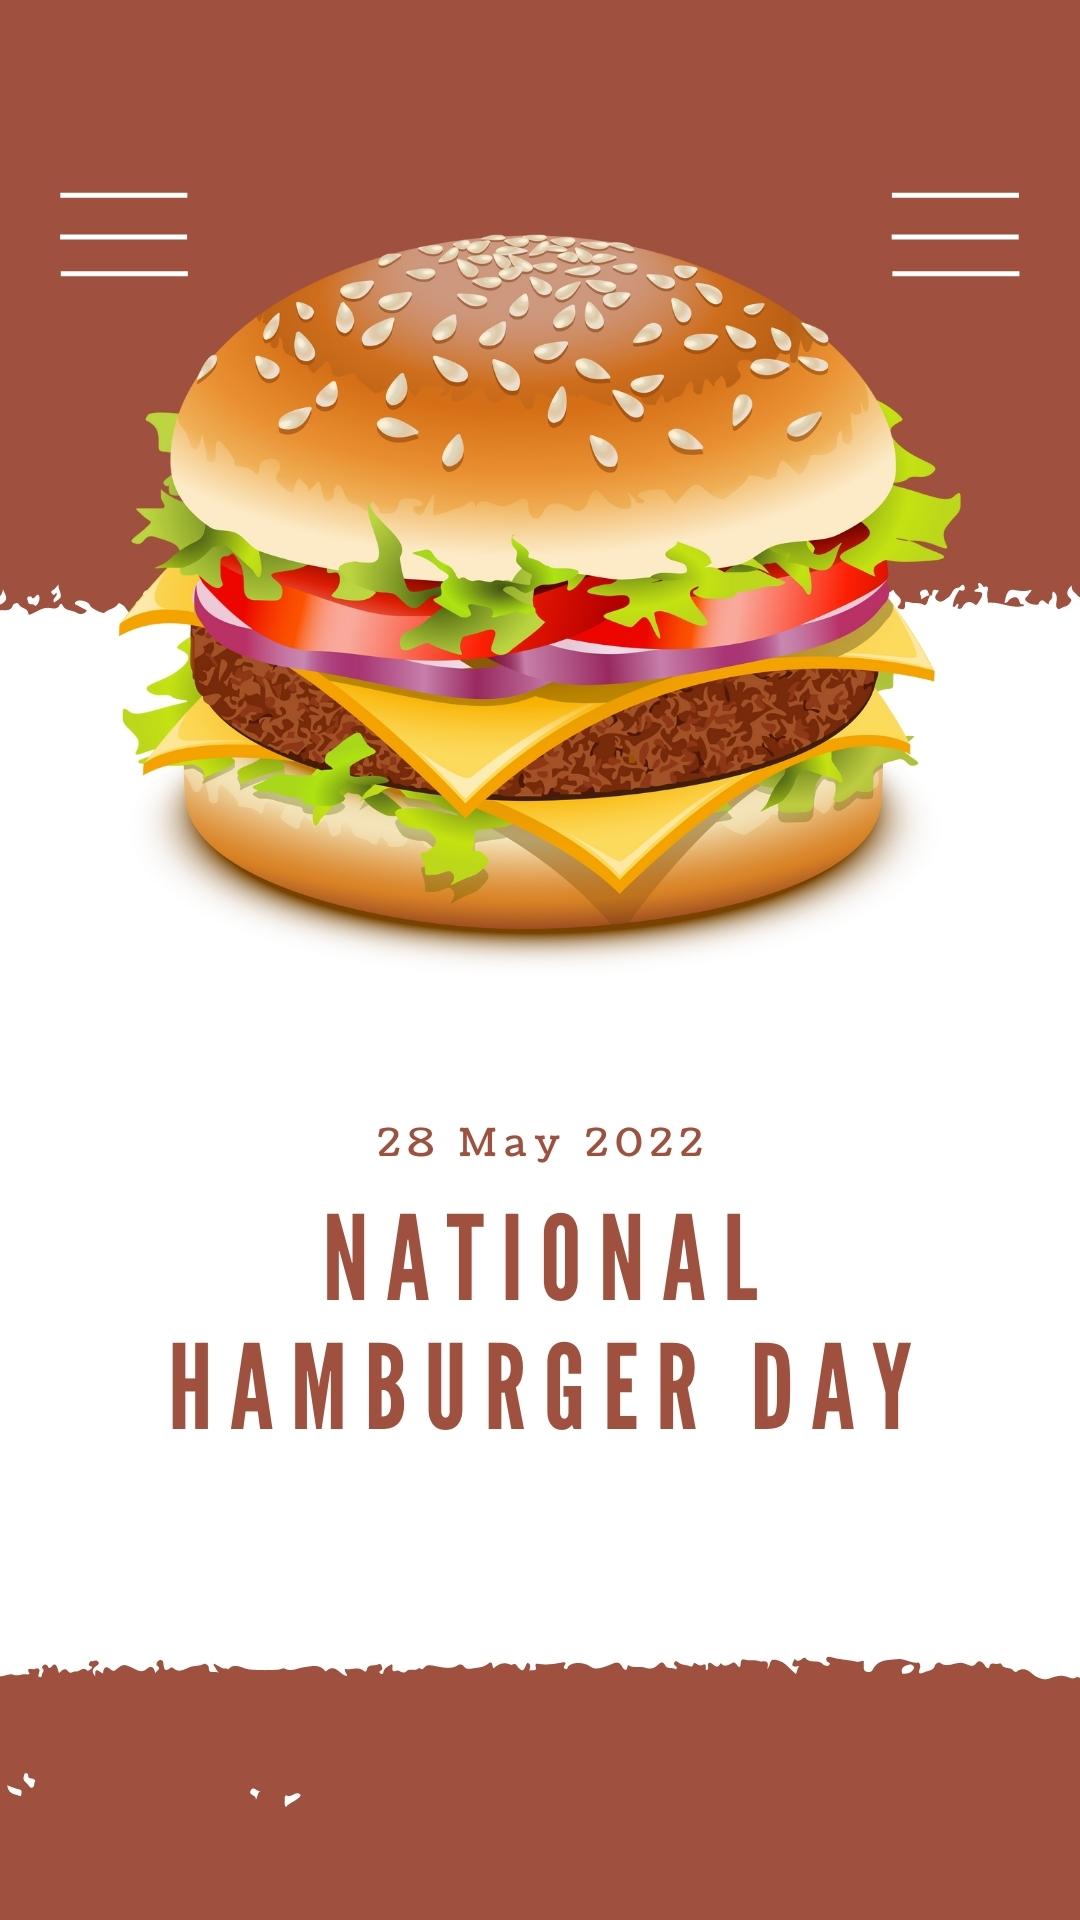 best national hamburger day wishes images for instagram post (32)